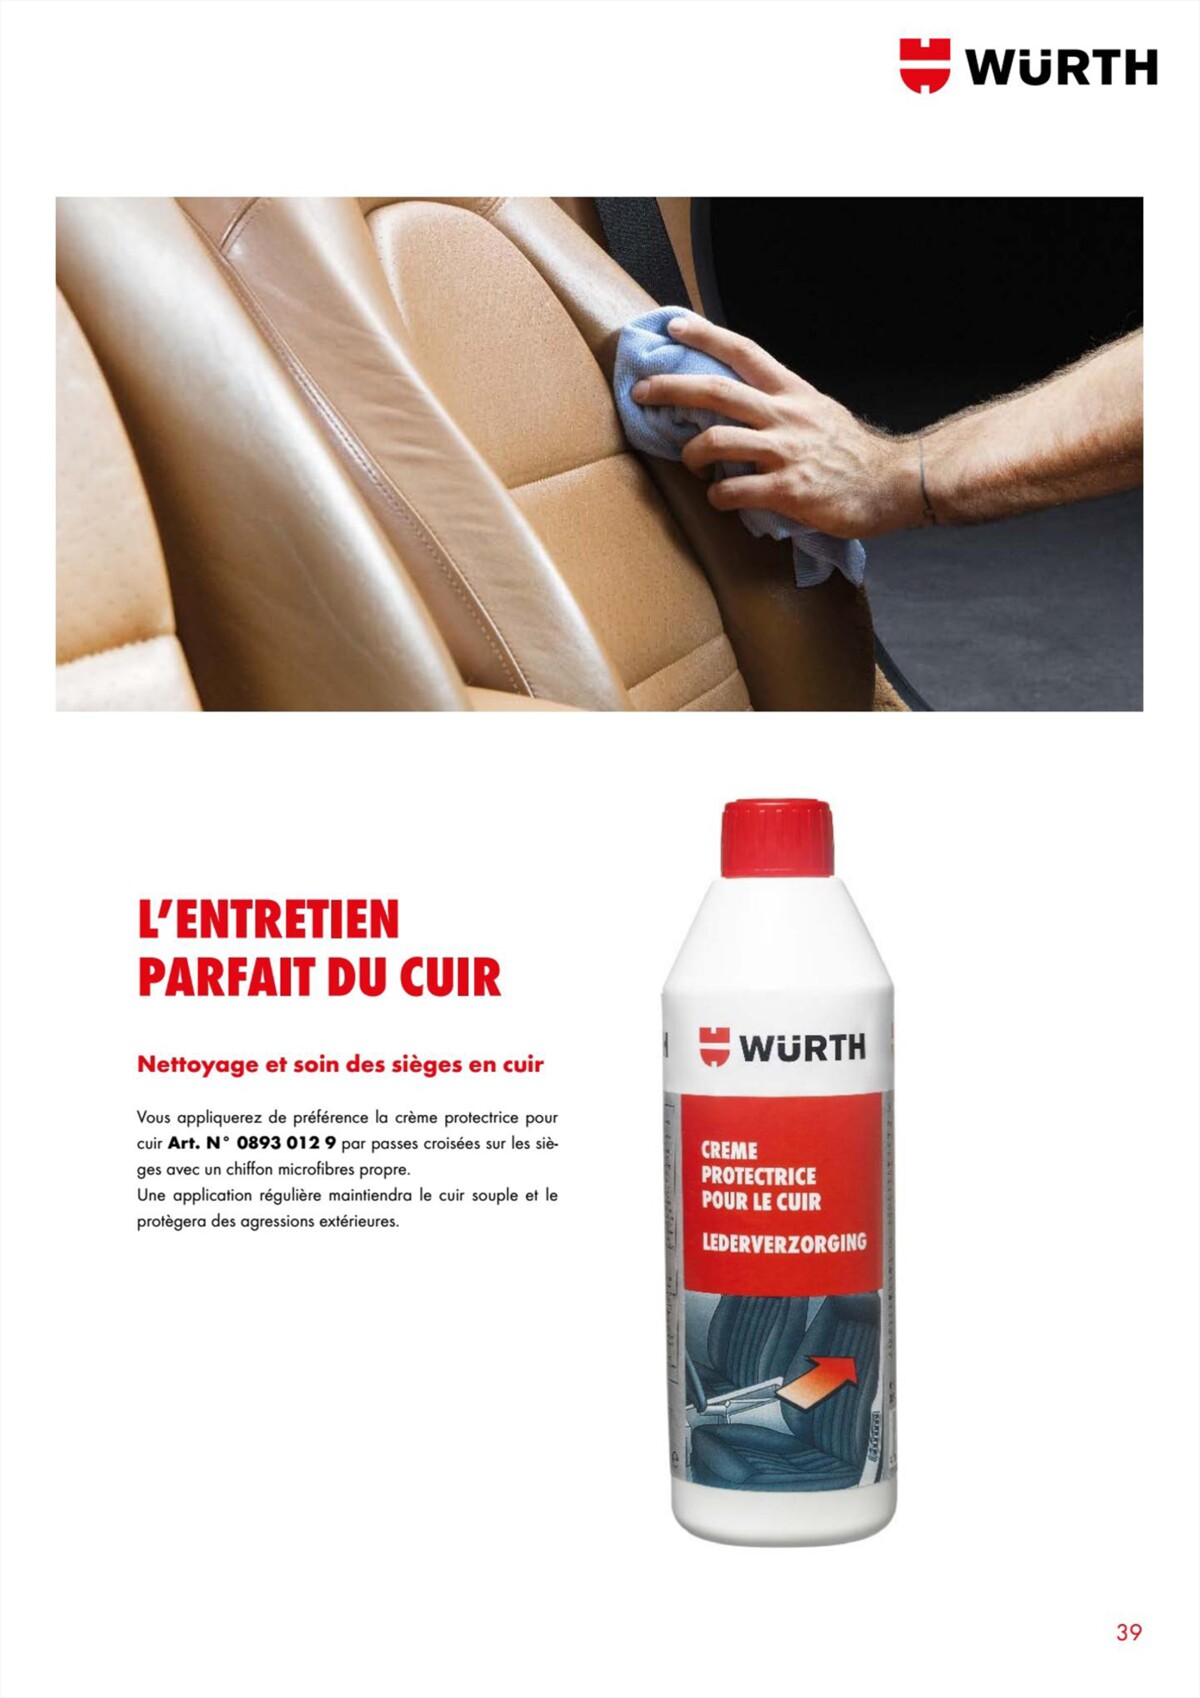 Catalogue Würth - Perfect Care, page 00039